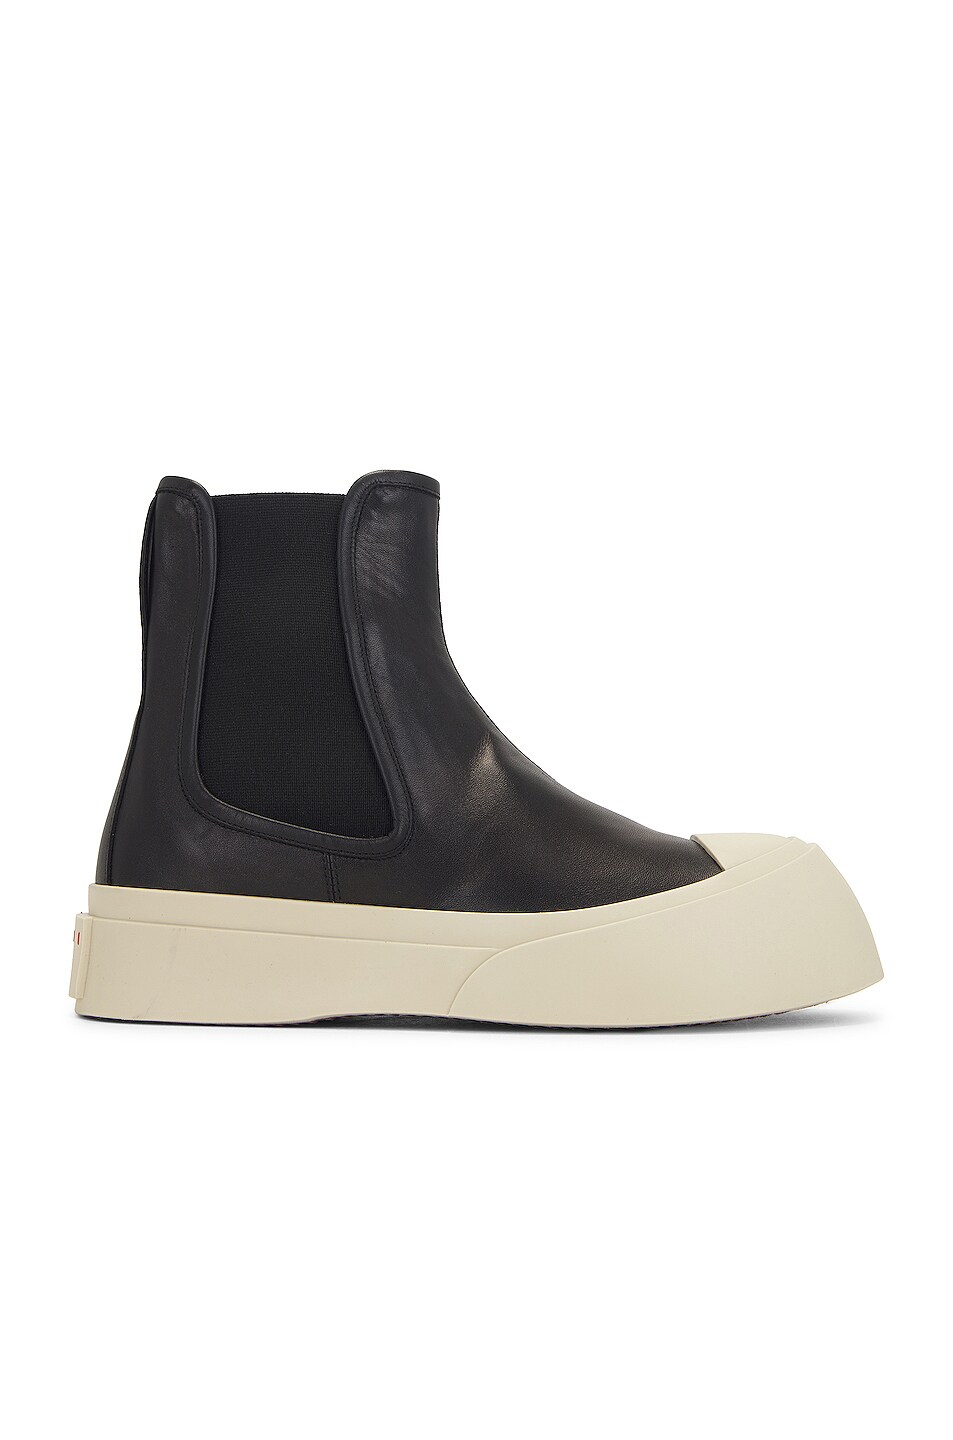 Image 1 of Marni Pablo Chelsea Boots in Black